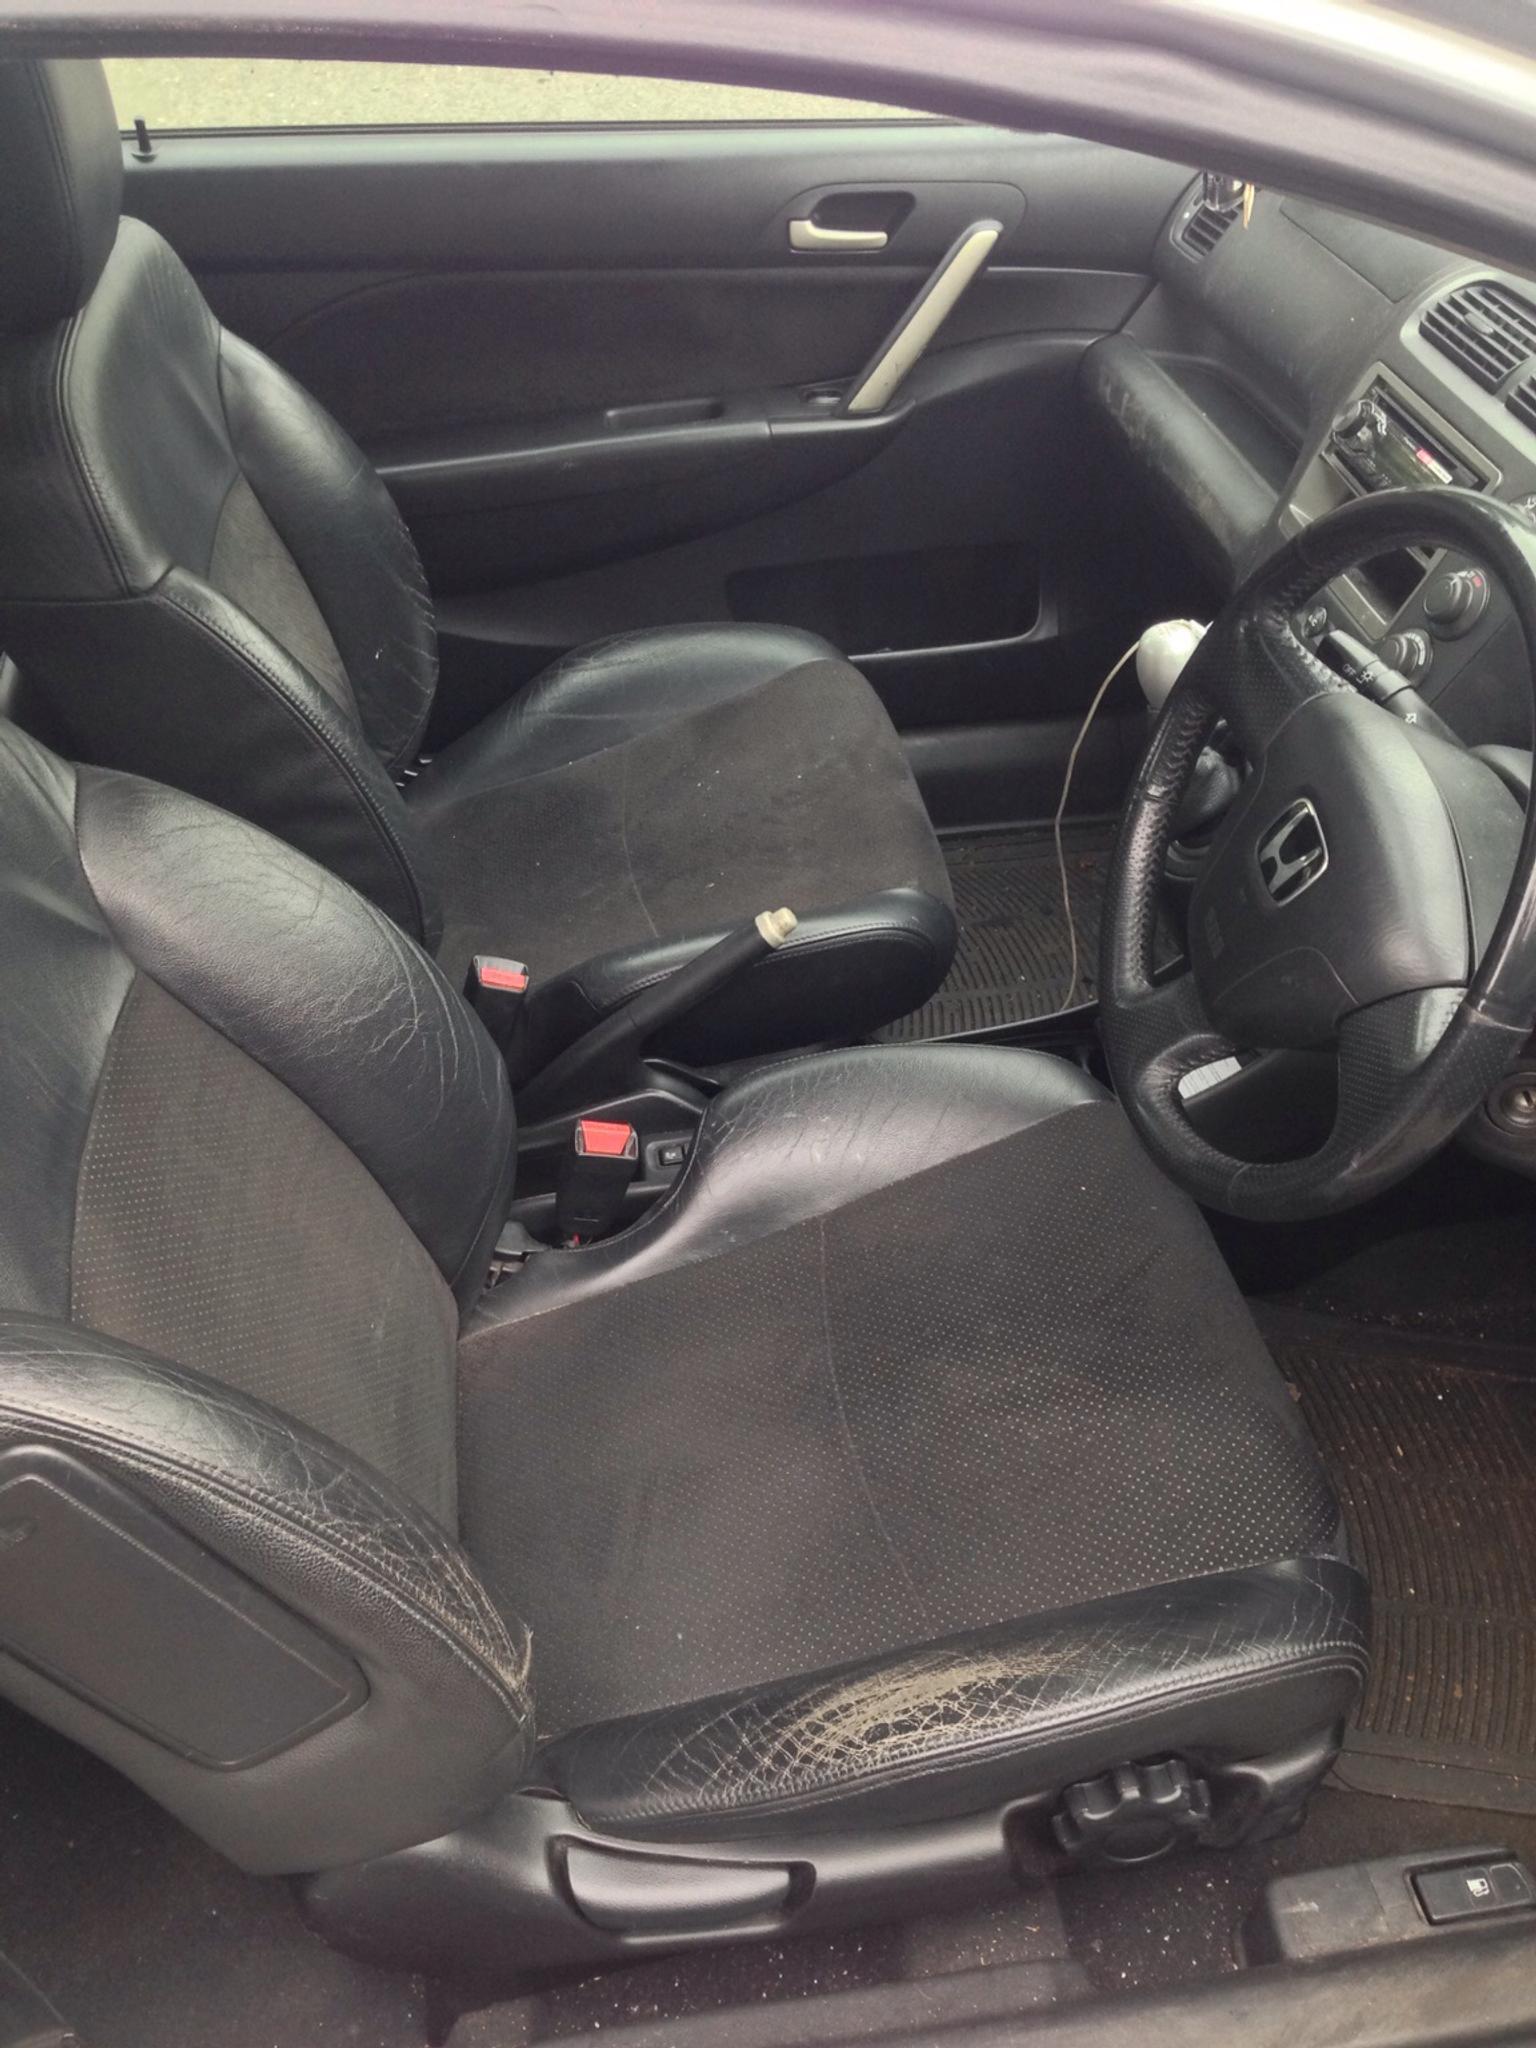 Honda Civic Ep3 2 Half Leather Interior In B9 Green For